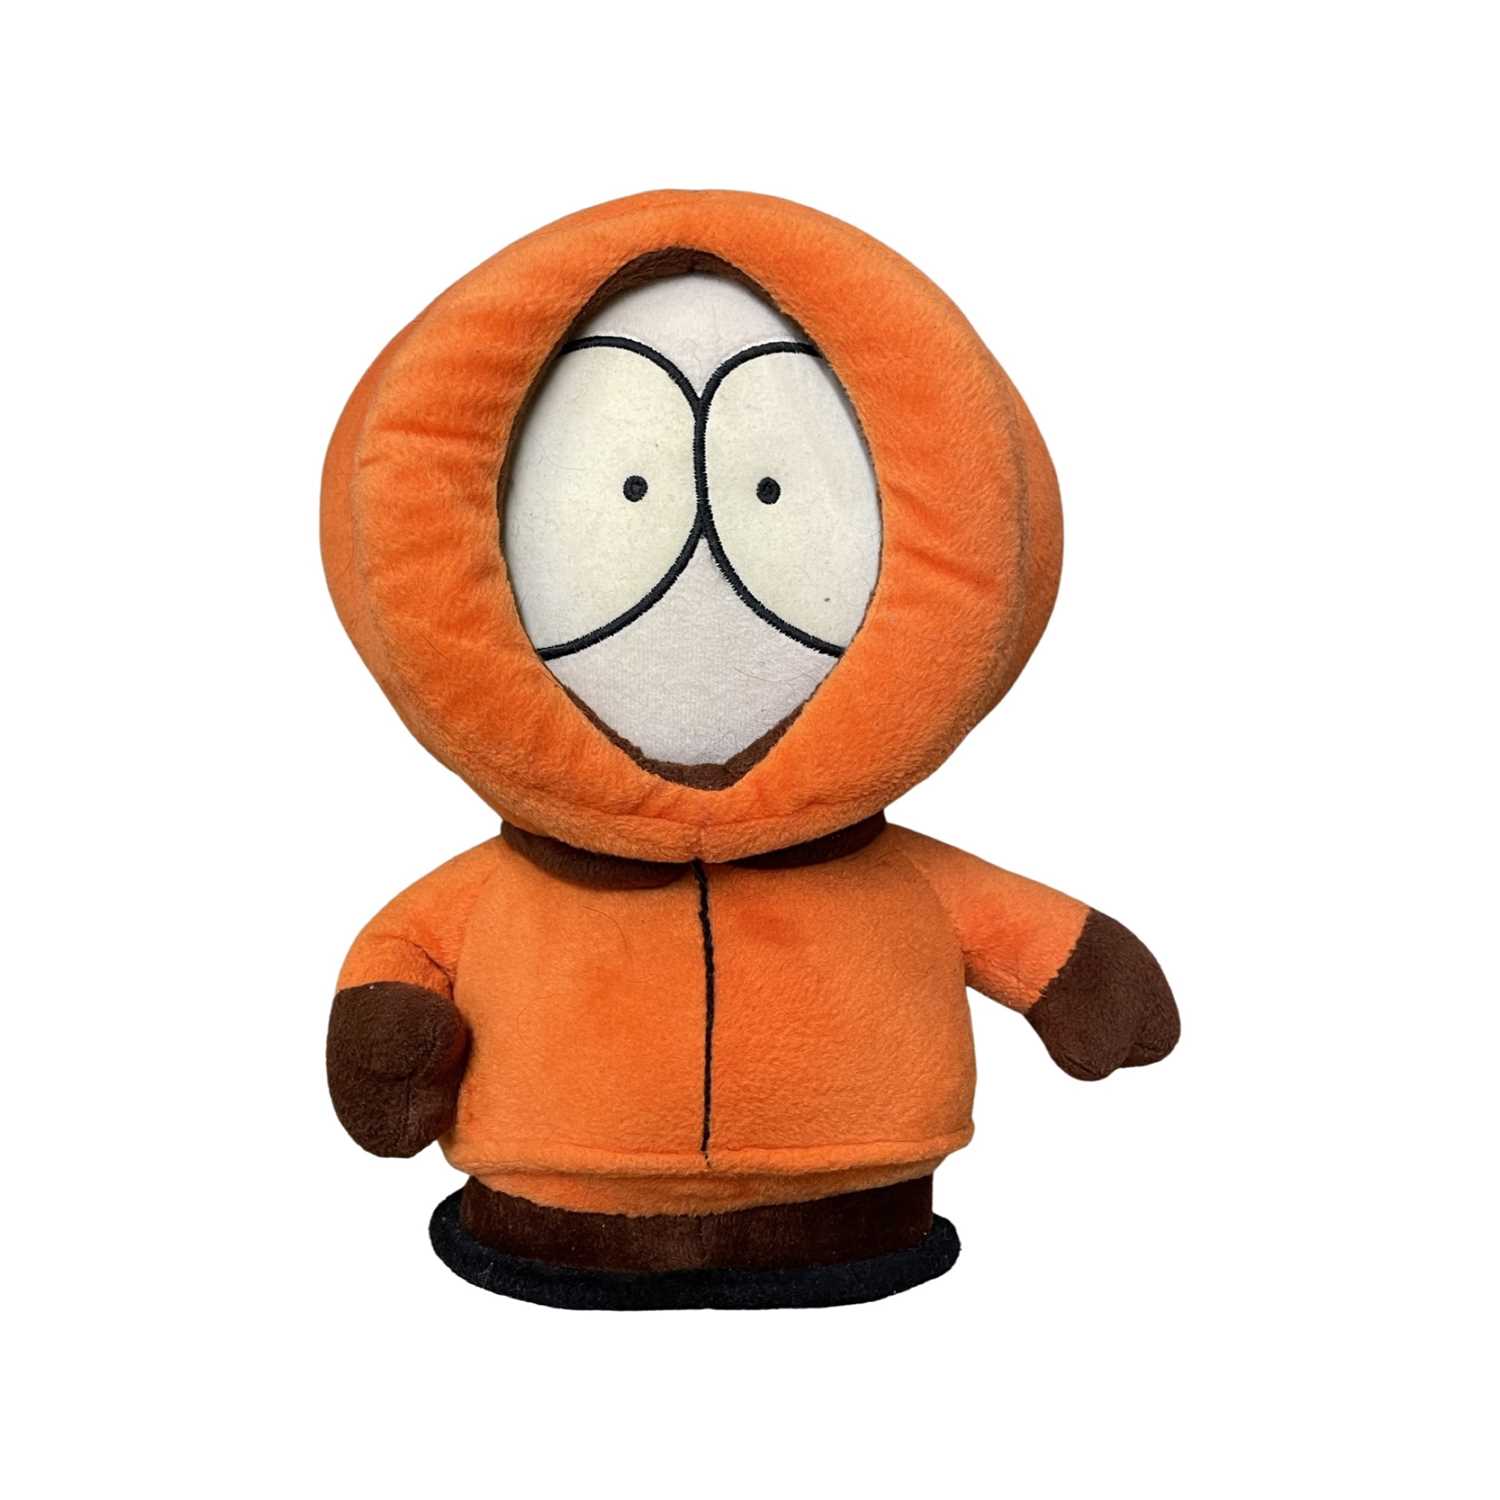 Lot 277 - A South Park 'Kenny' plush toy, height